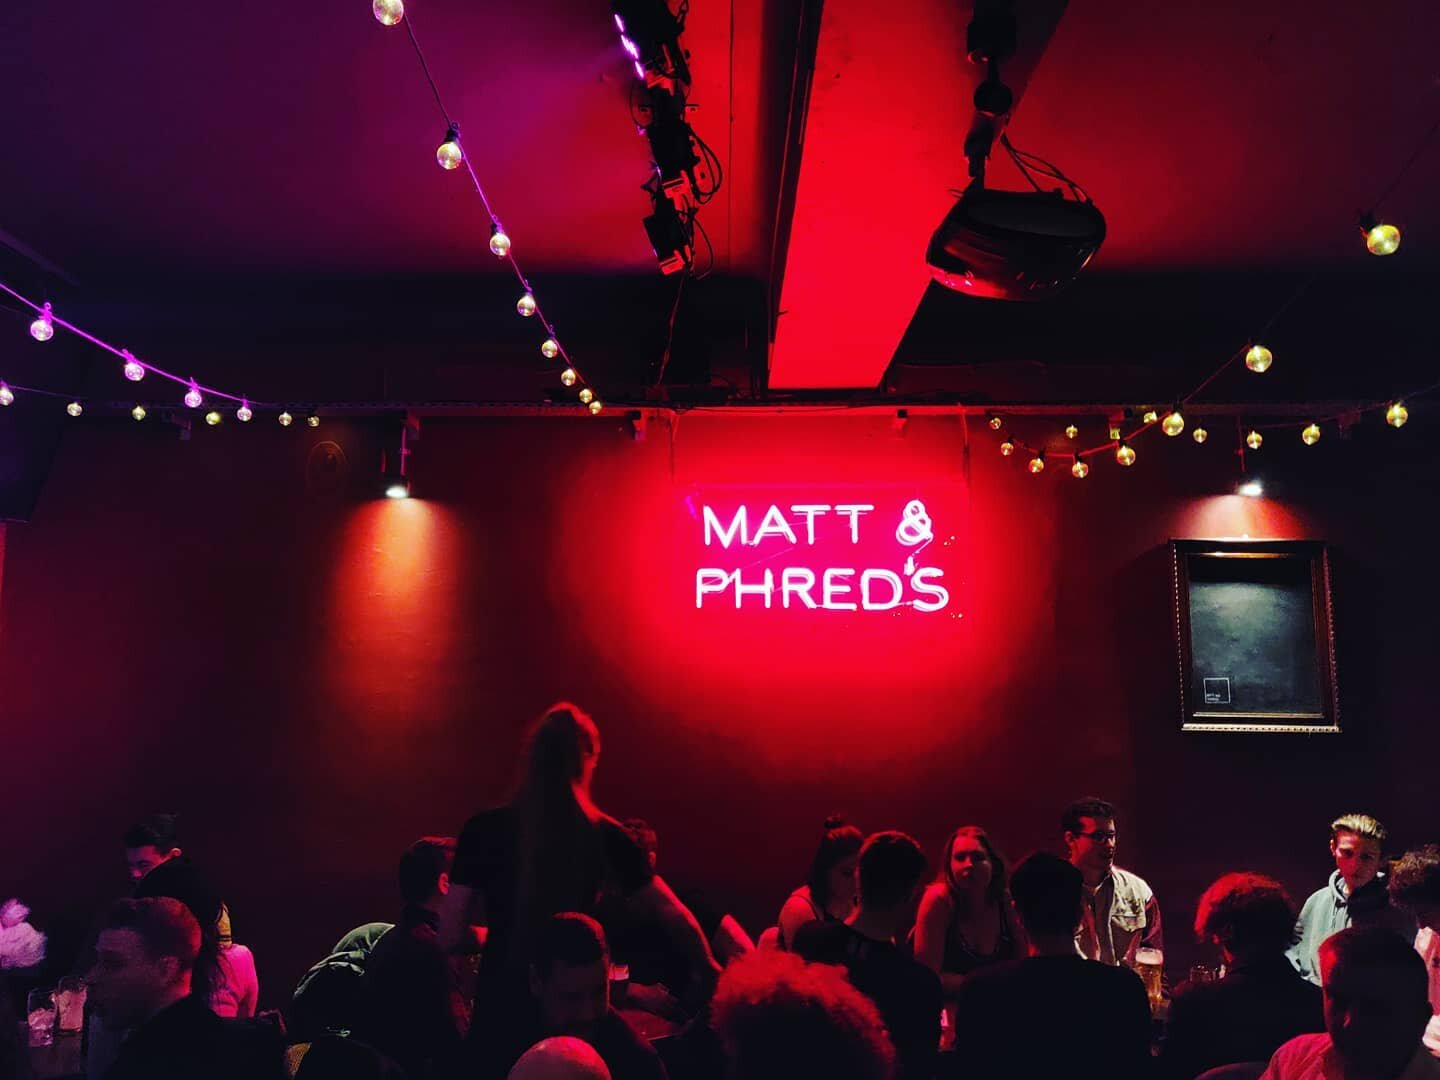 TONIGHT!! Get down to see a rare publice performance from us 🙌👊🎉 #music #entertainment #manchestermusic #mattandphreds